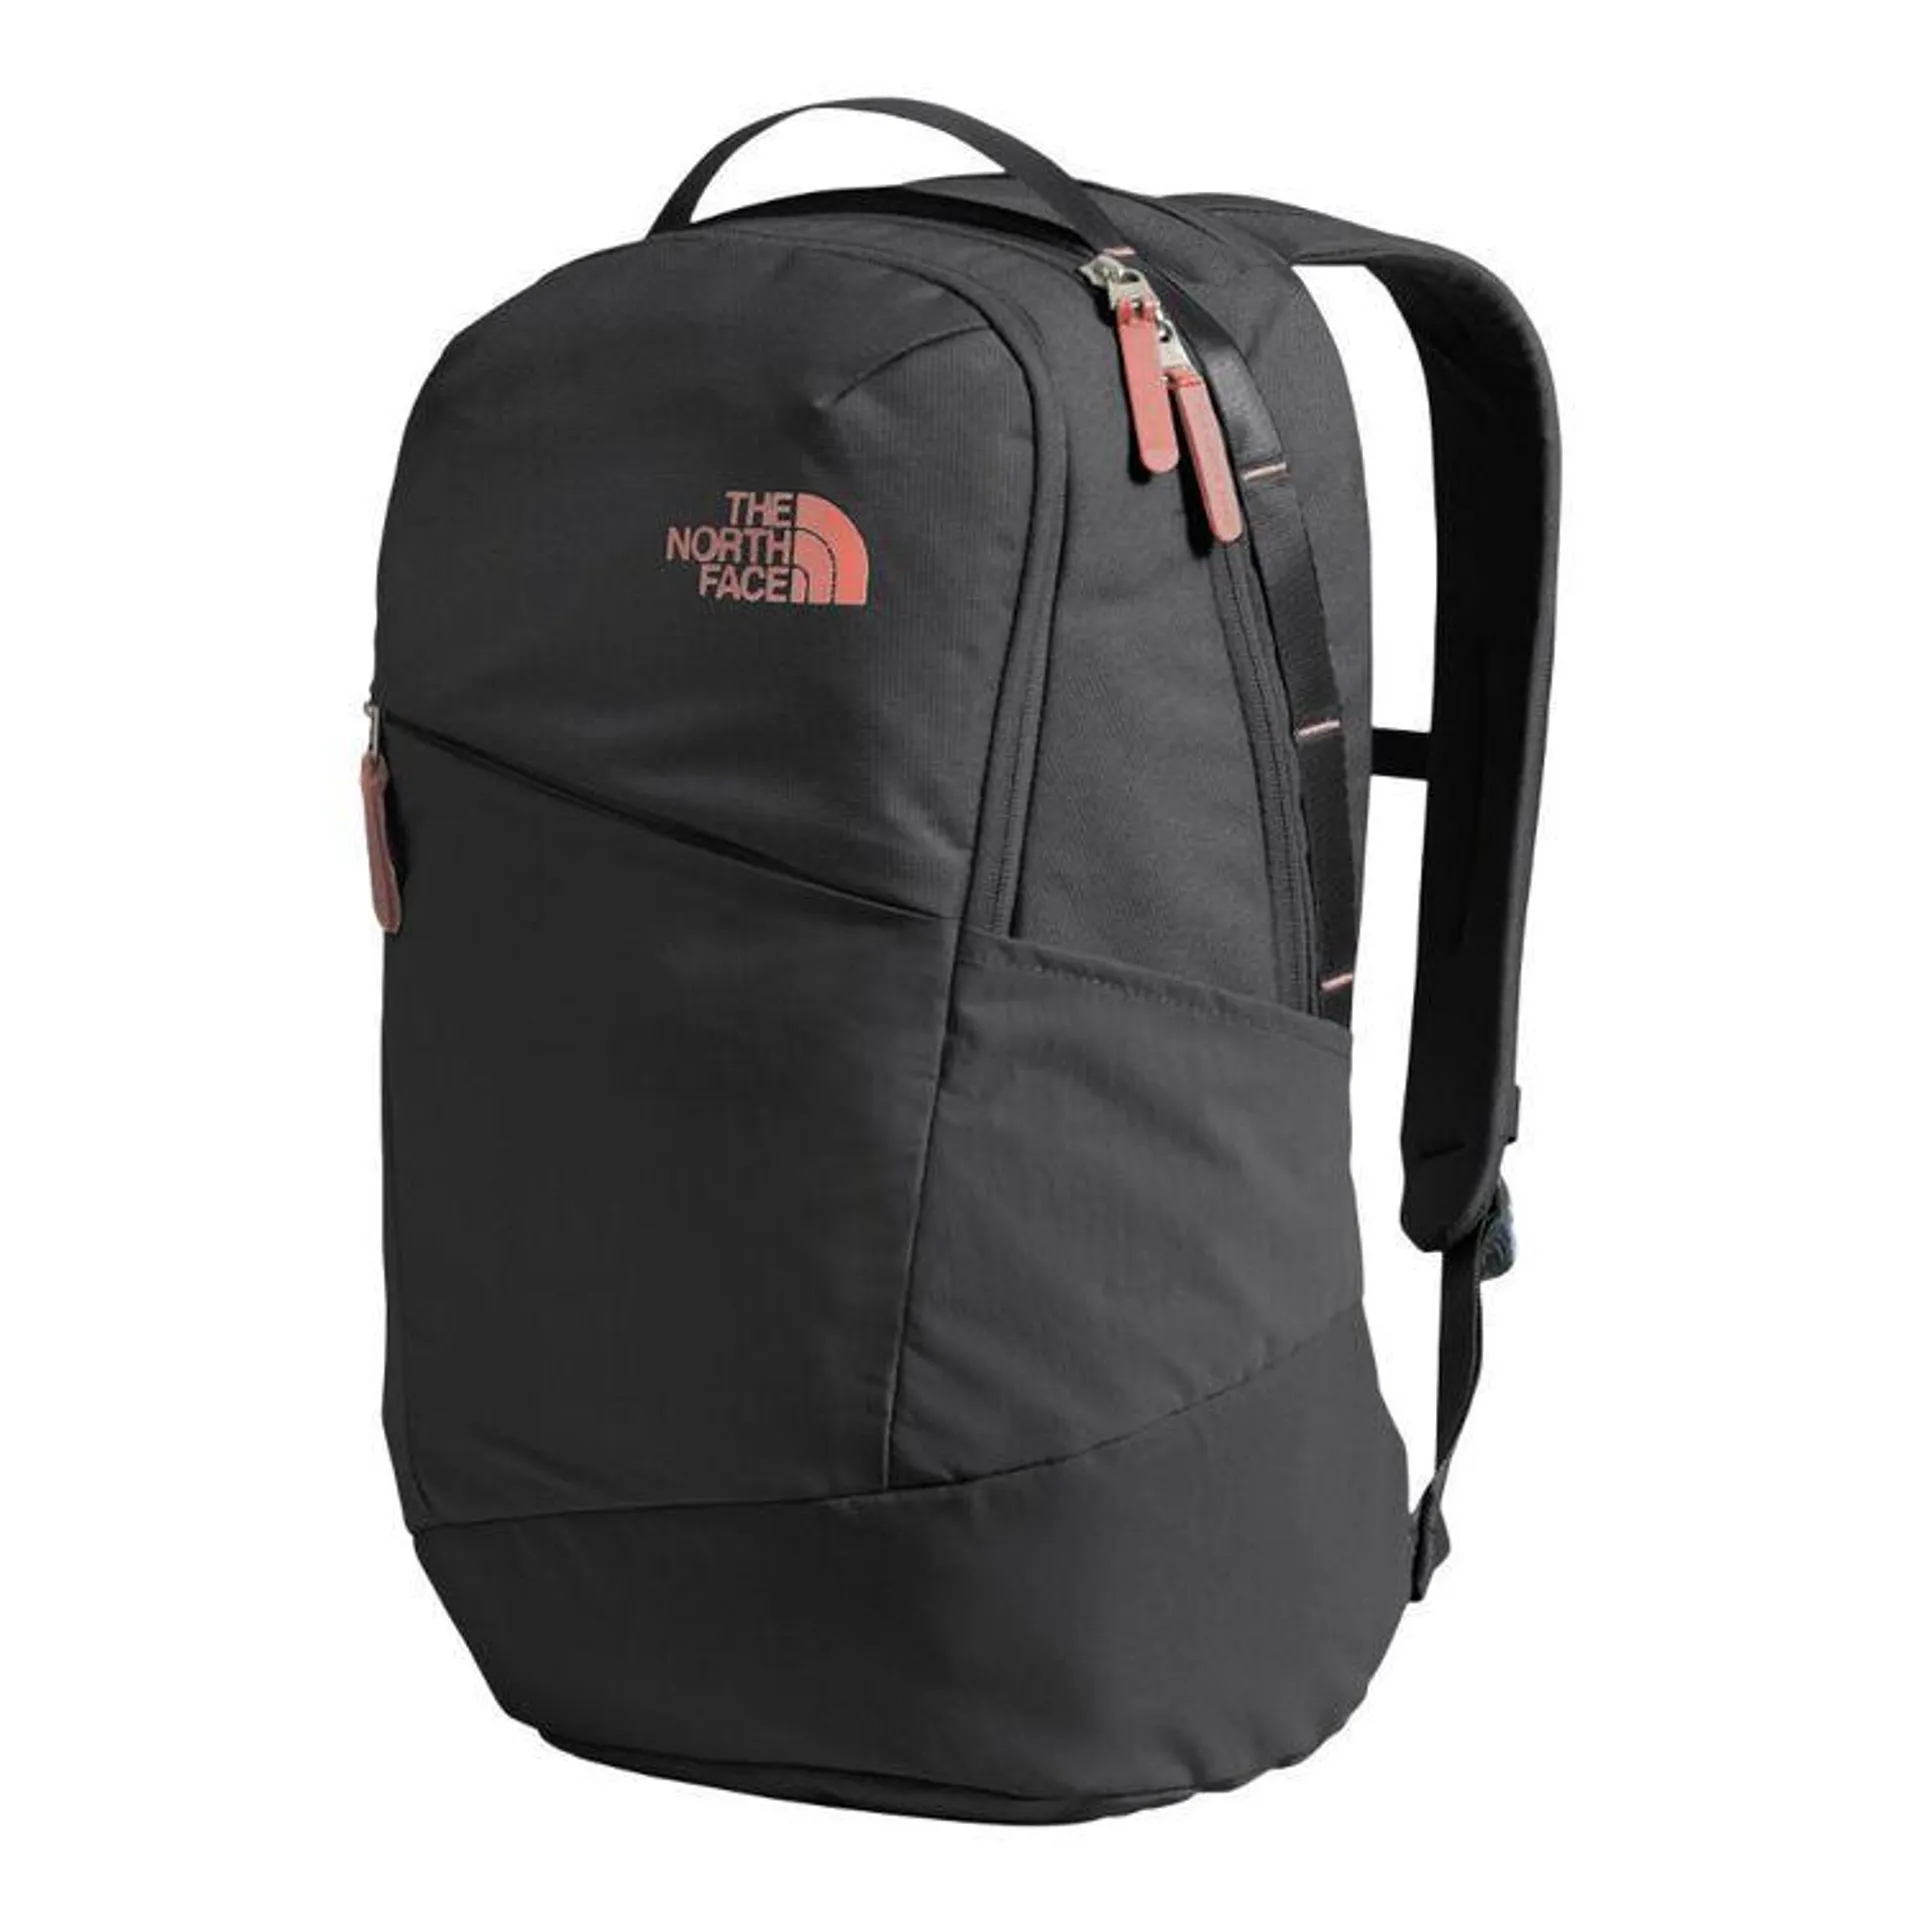 The North Face Women's Isabella Black Heather 20l